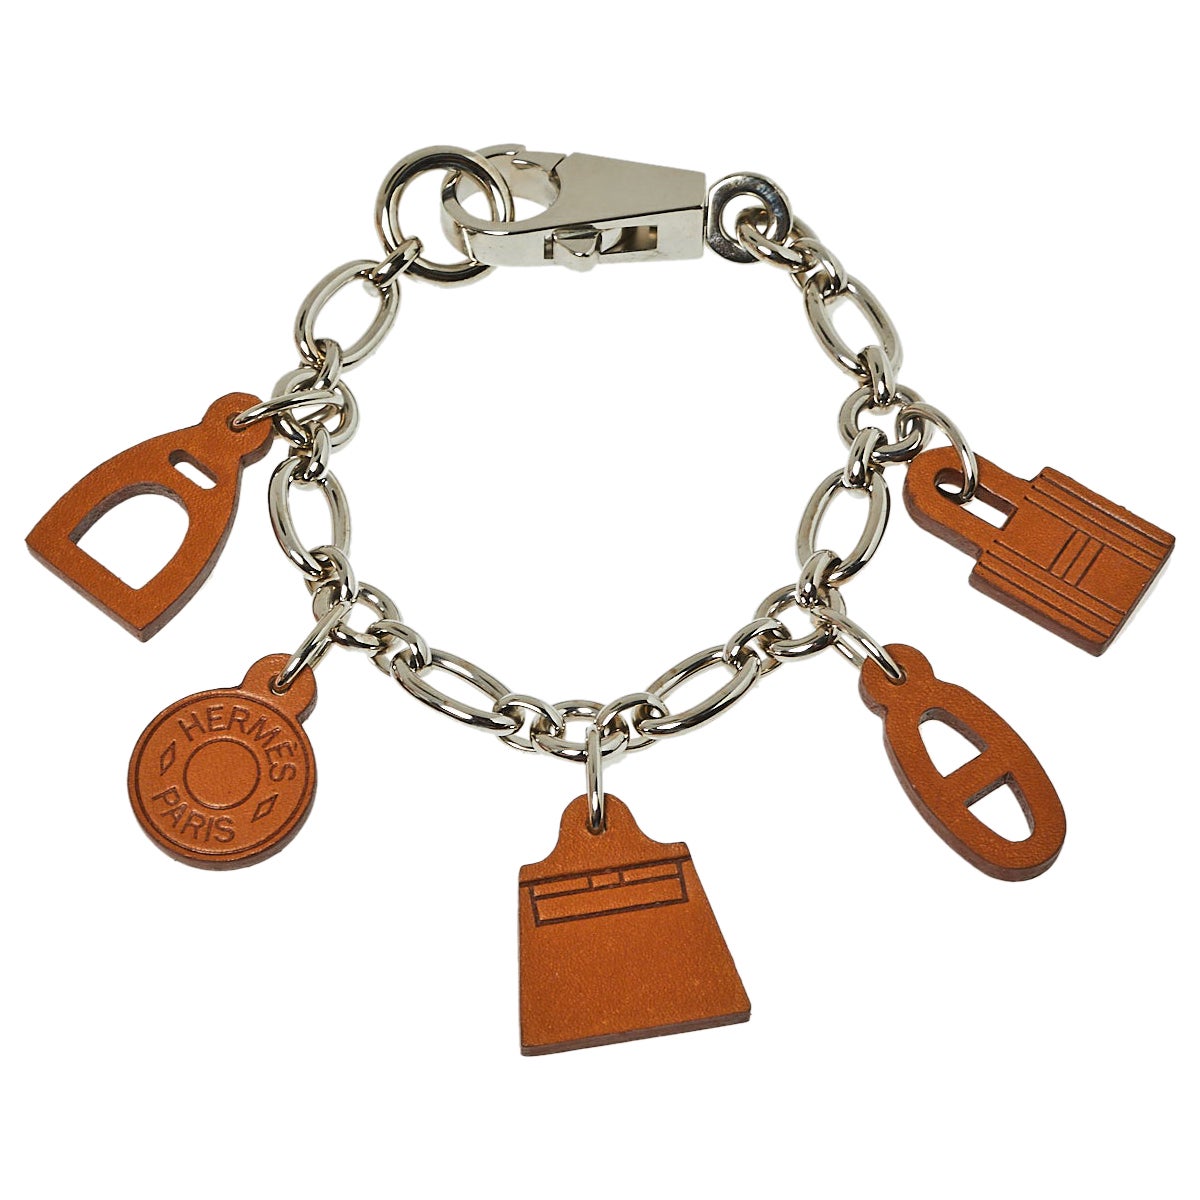 Hermes Breloque Charm Chain bag NOT included